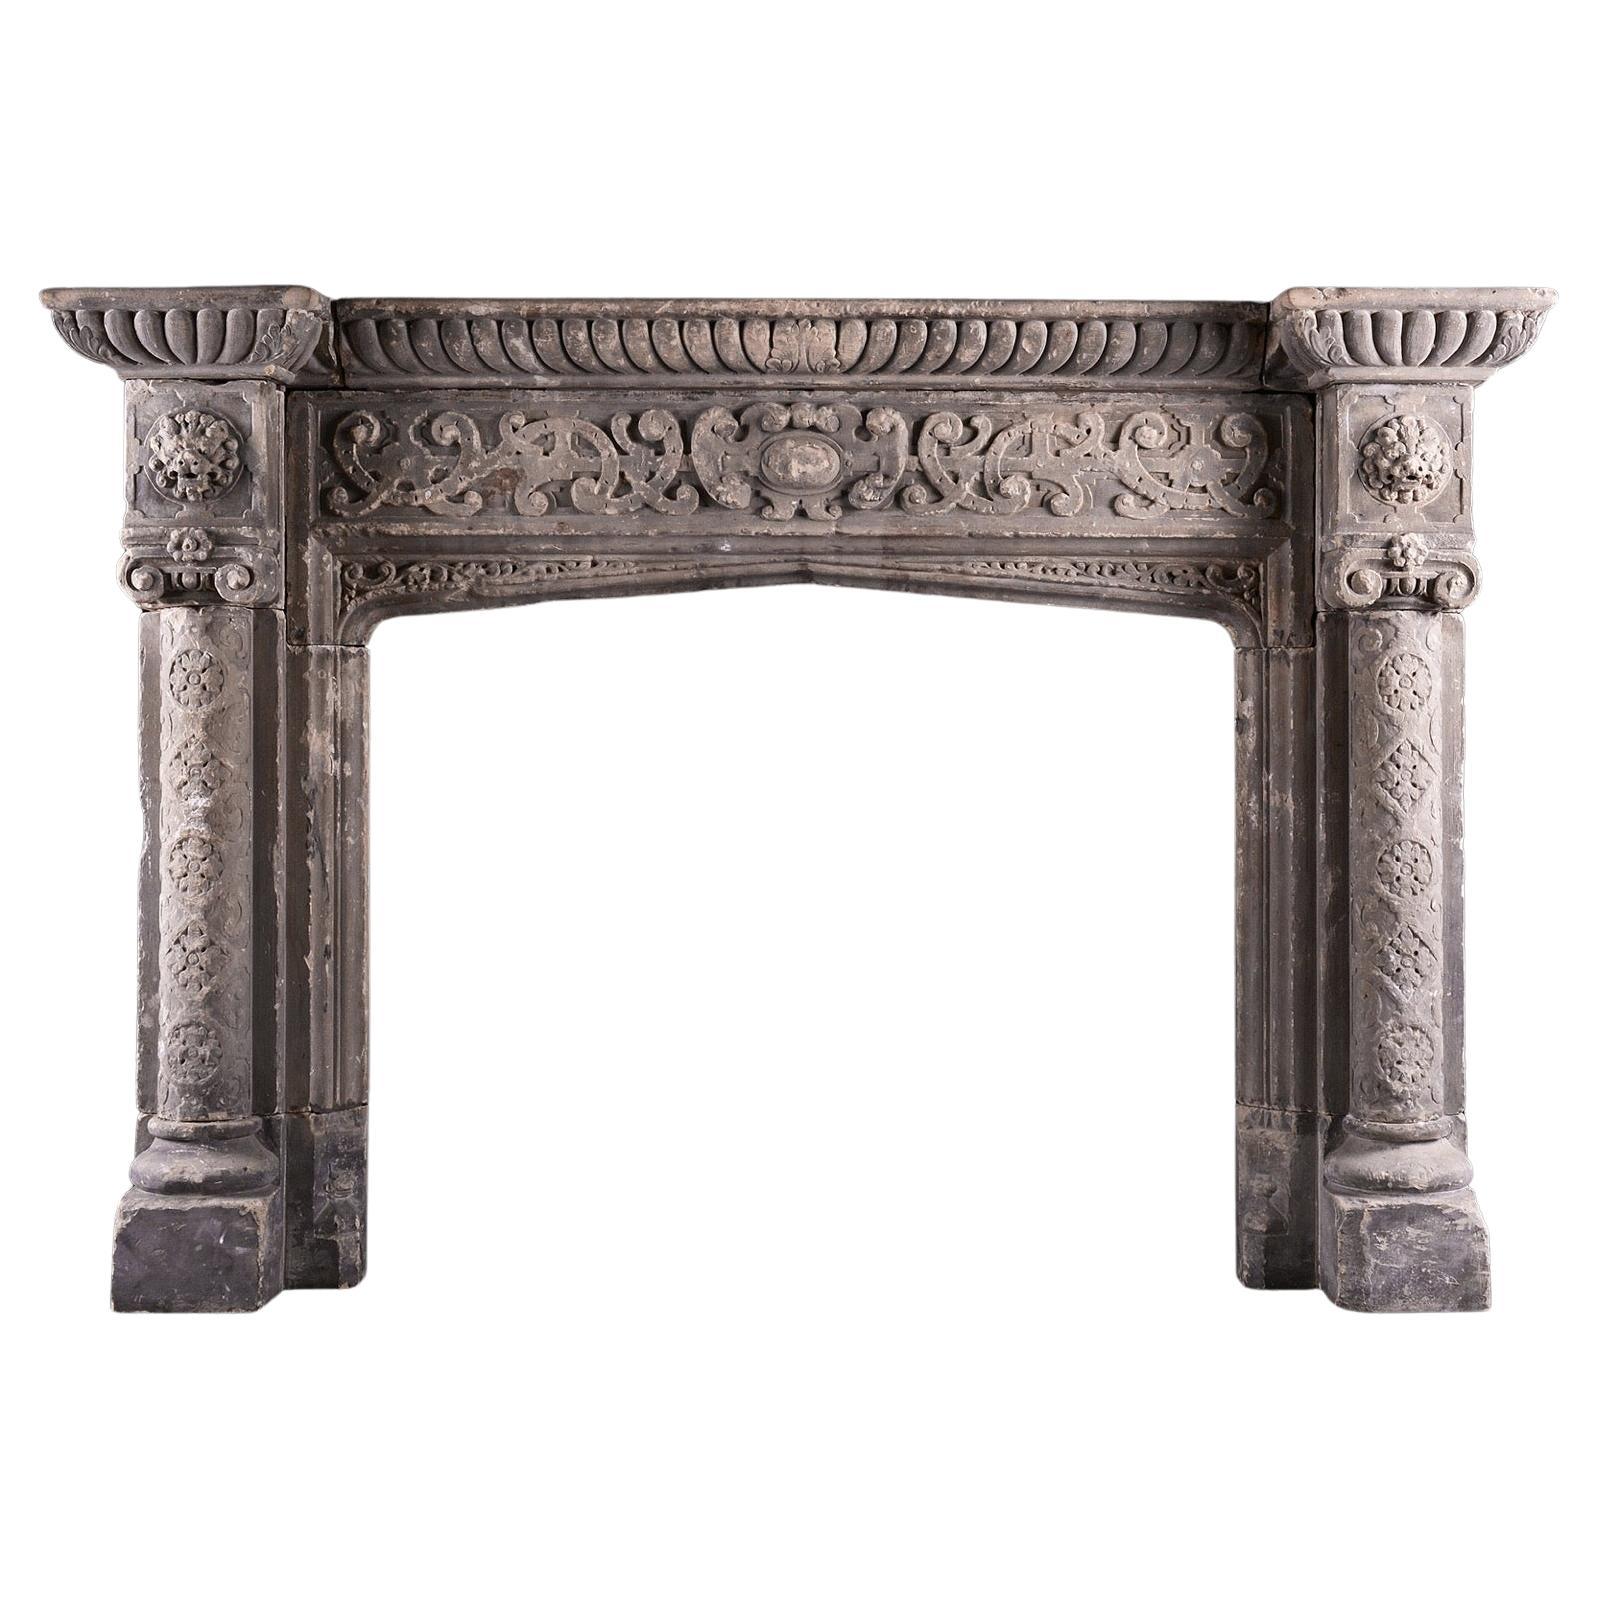 A Rustic Neo-Gothic Stone Fireplace For Sale